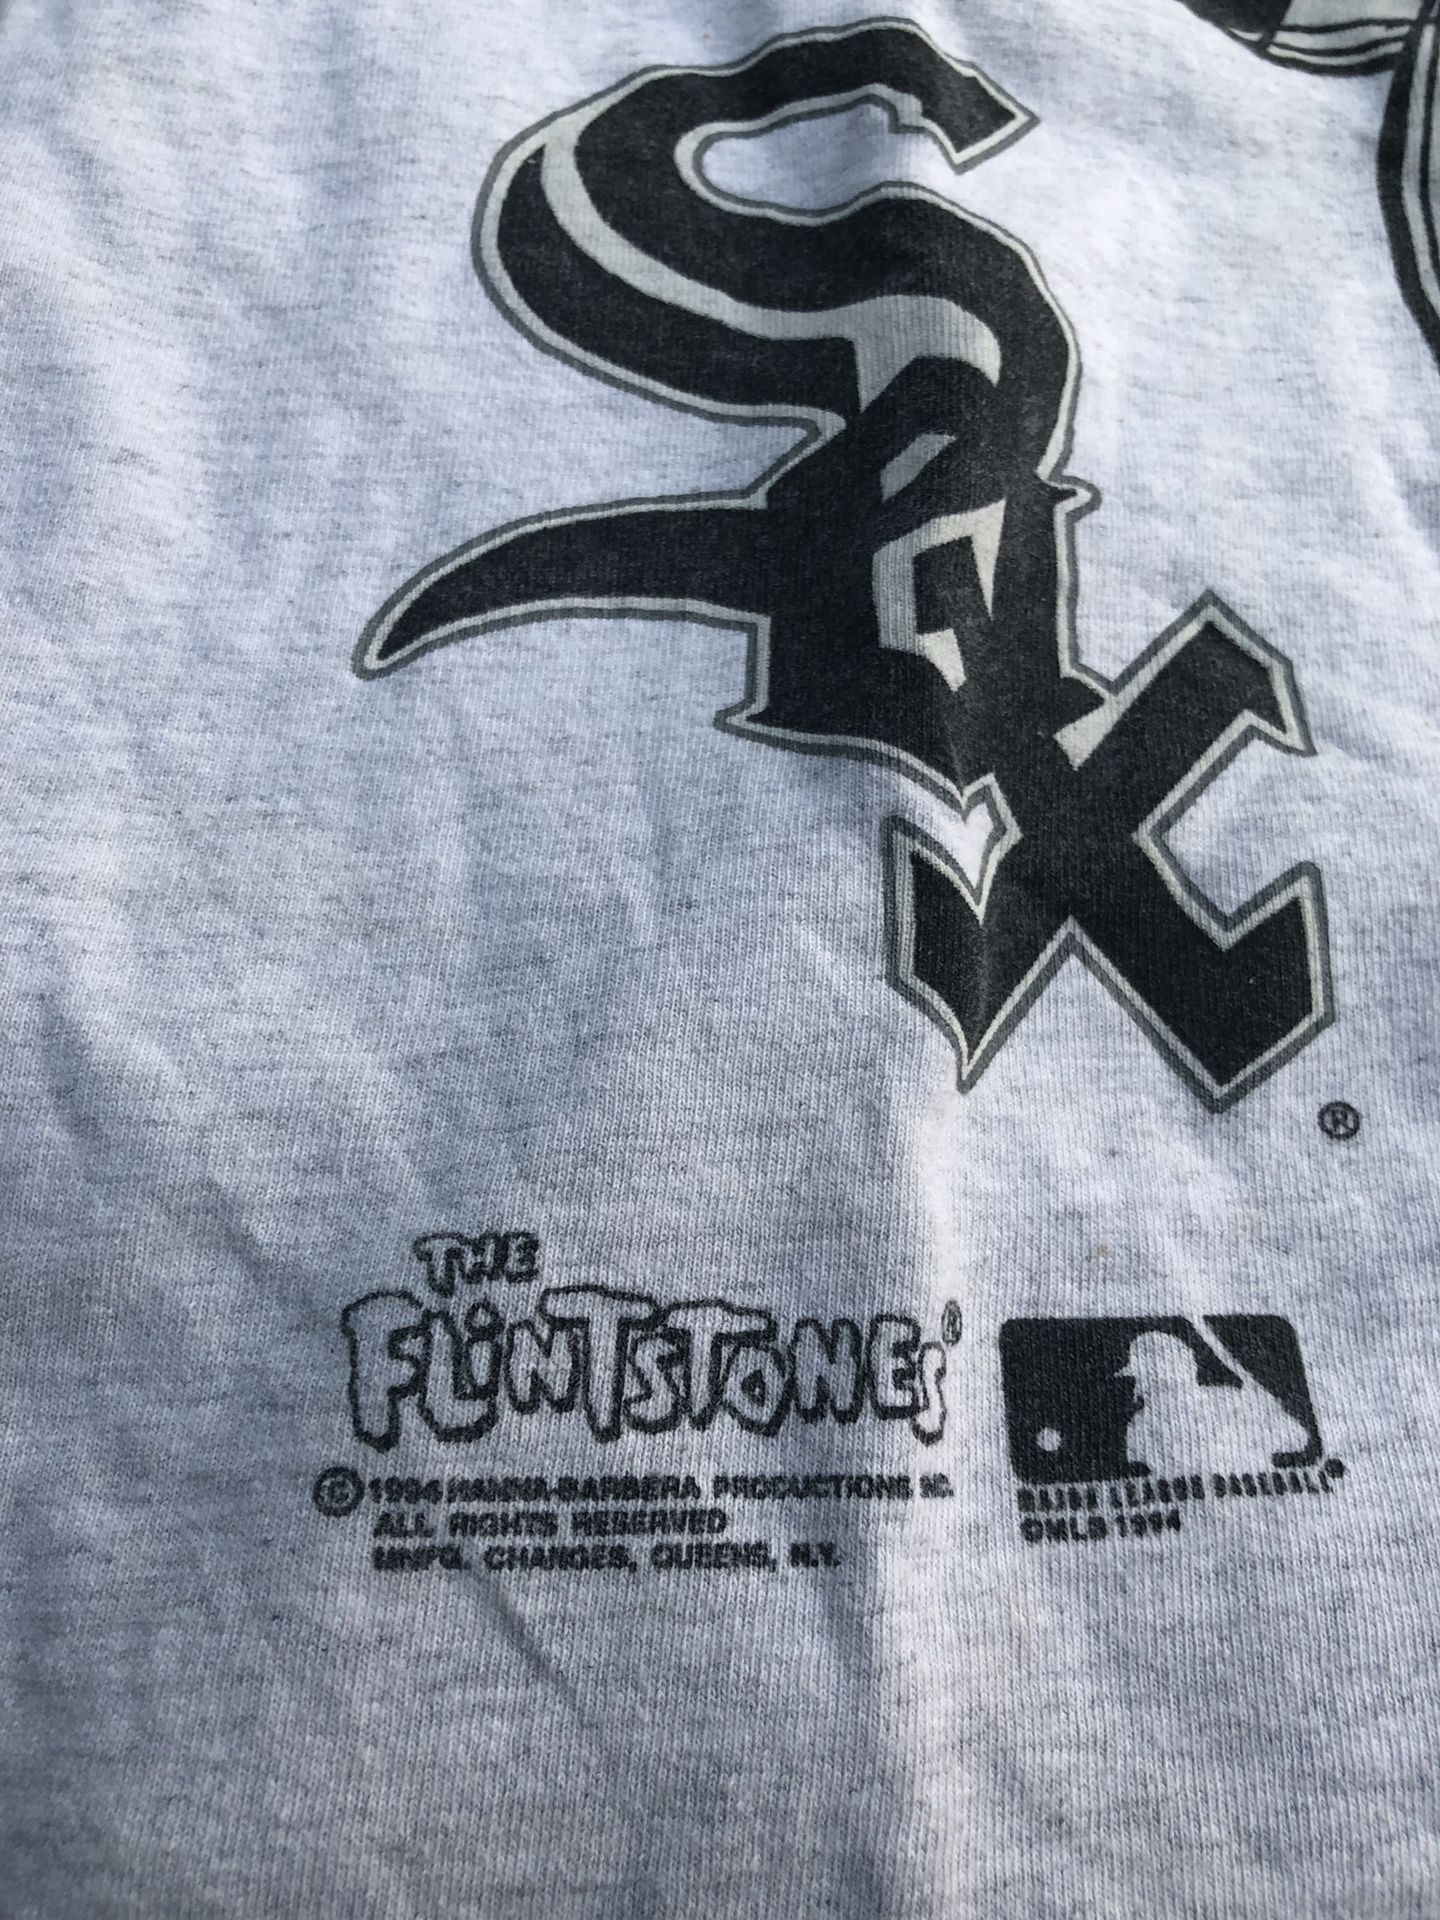 Vintage 90s MLB White Sox Fred Flintstones tee t shirt for Sale in  Milpitas, CA - OfferUp